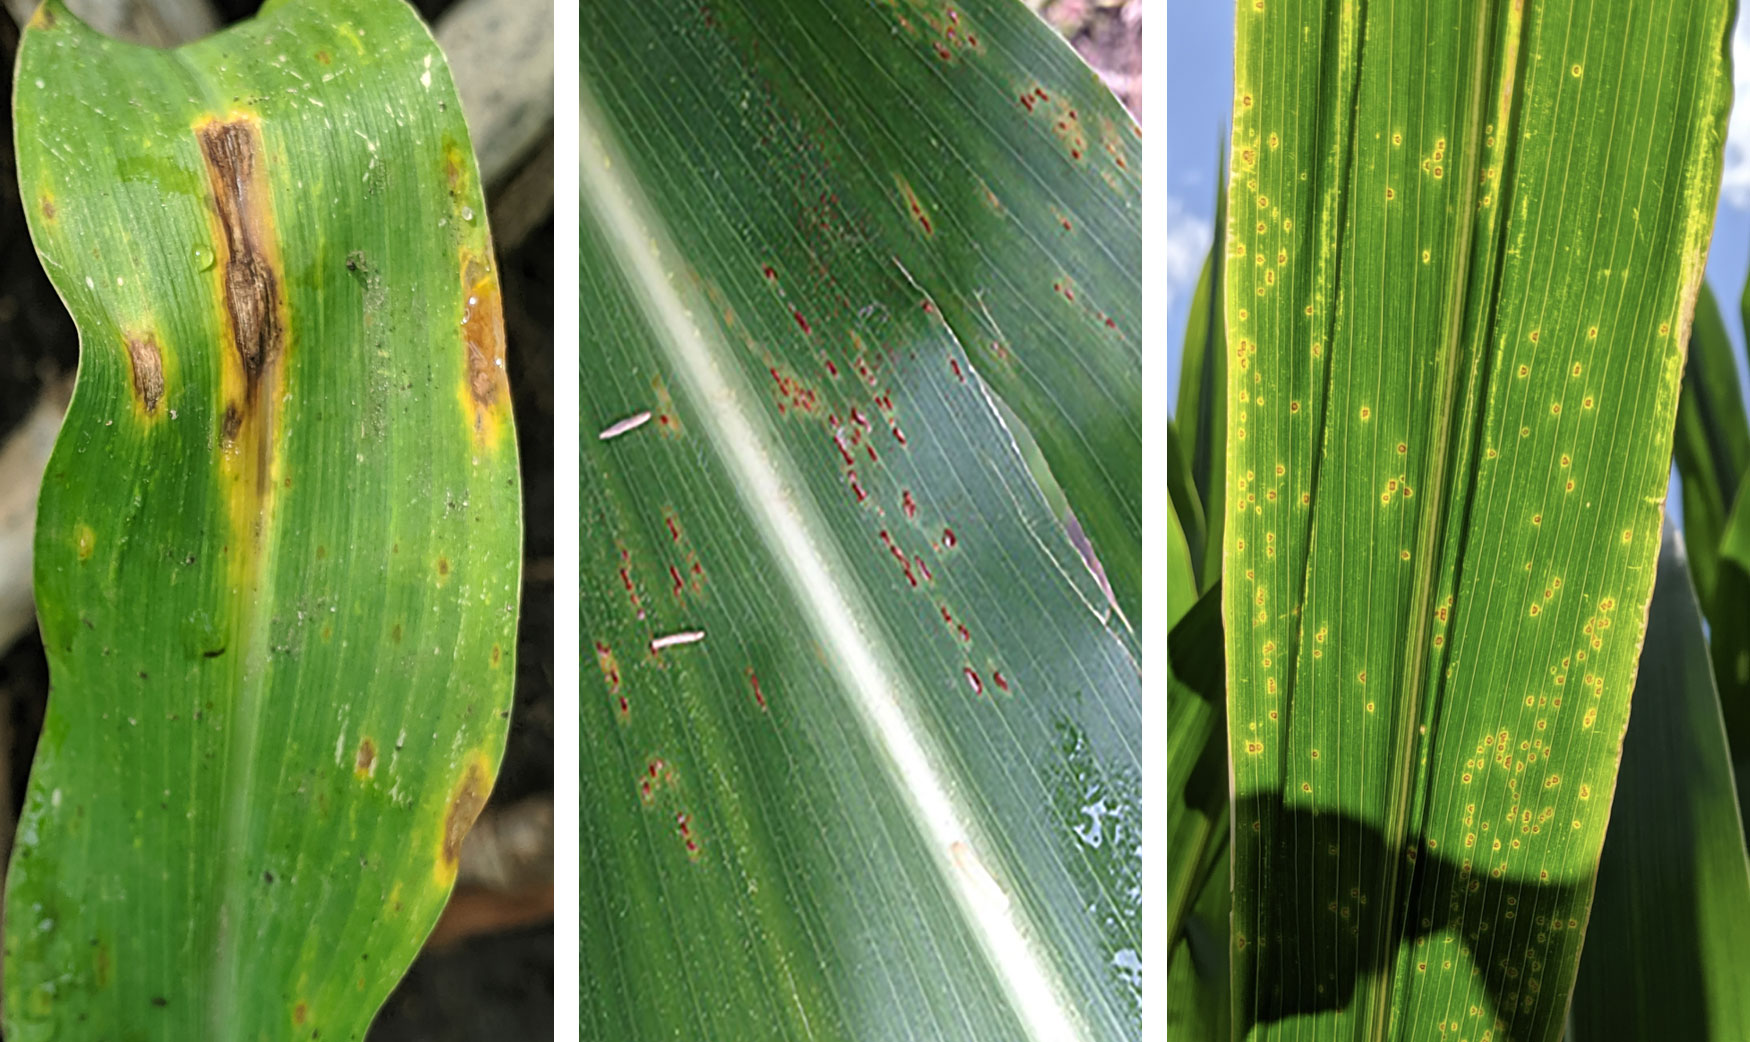 Symptoms of three common corn diseases. From left: anthracnose leaf blight, common rust and eyespot.